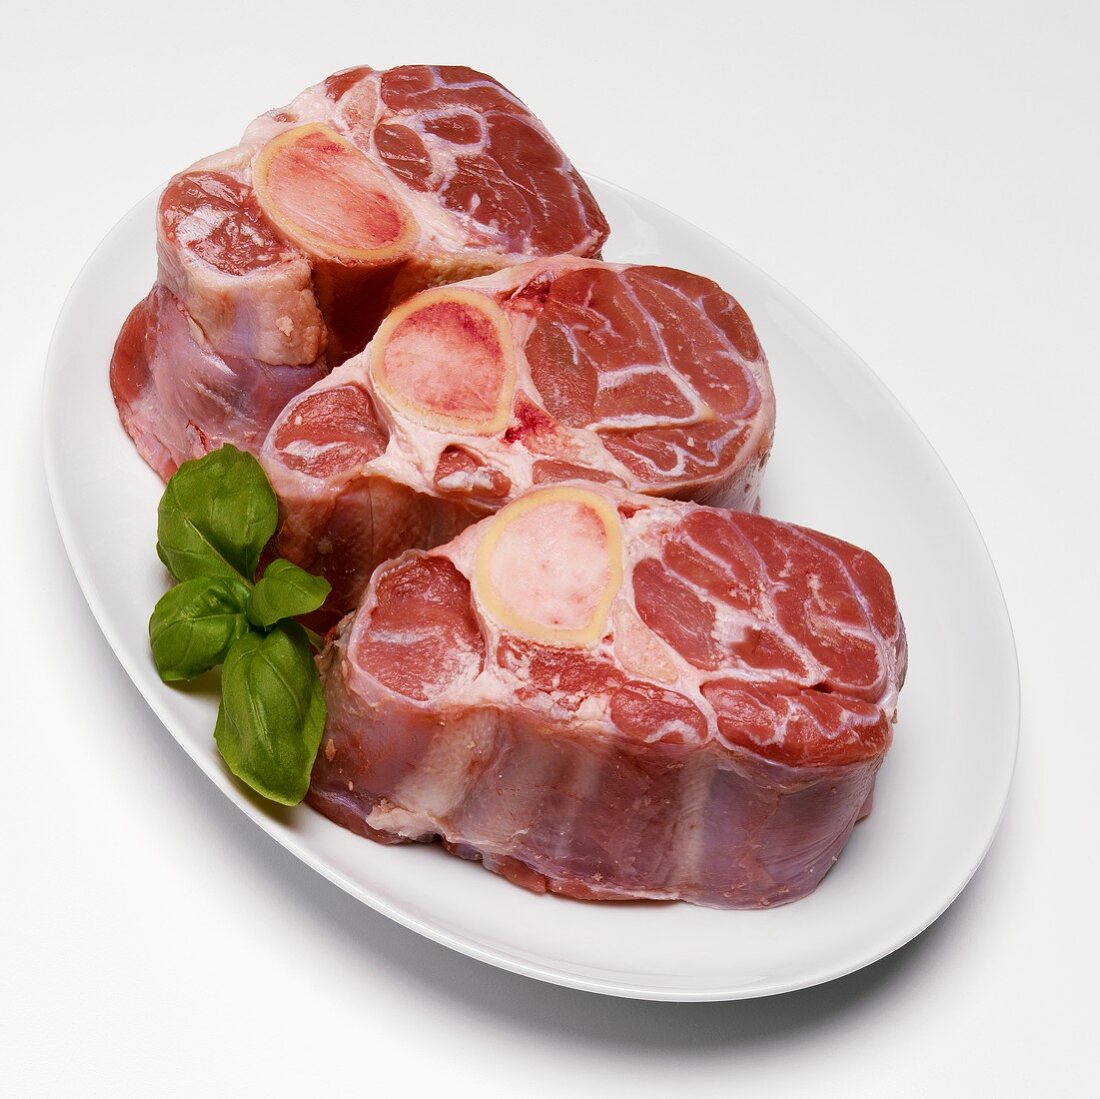 Three Raw Chops for Osso Bucco with Basil on White